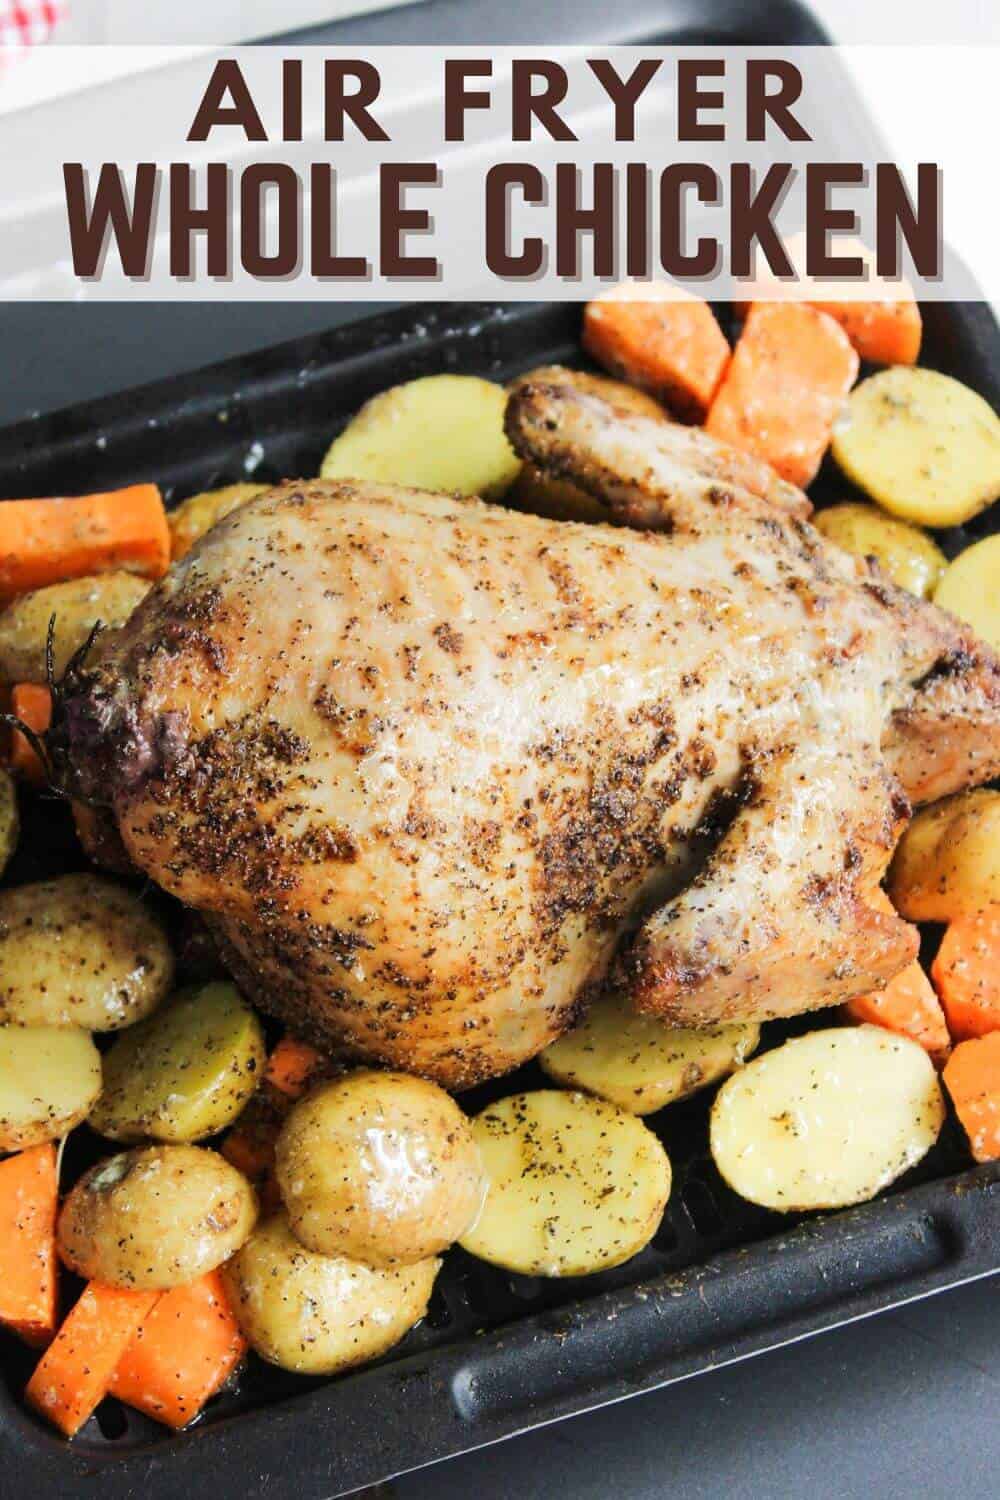 Air fryer whole chicken with carrots and potatoes.